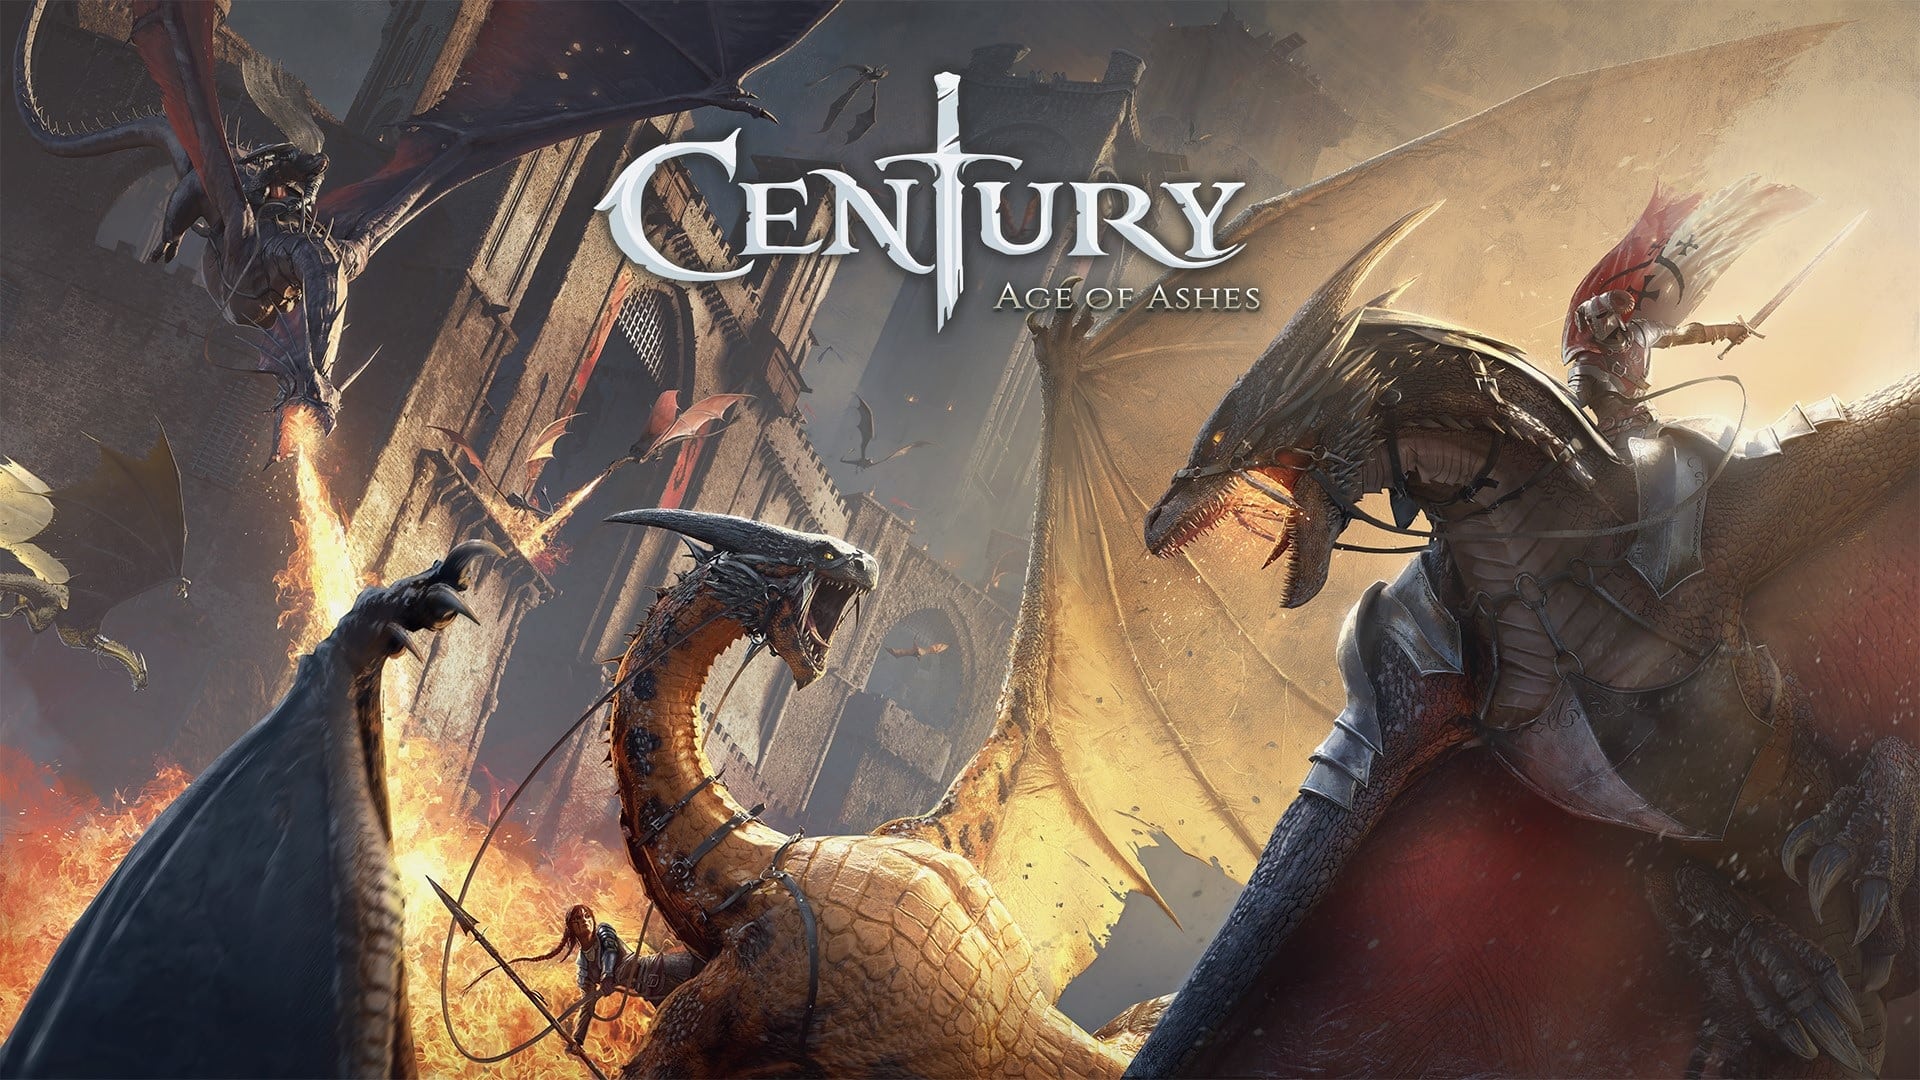 Century age of ashes grátis na steam